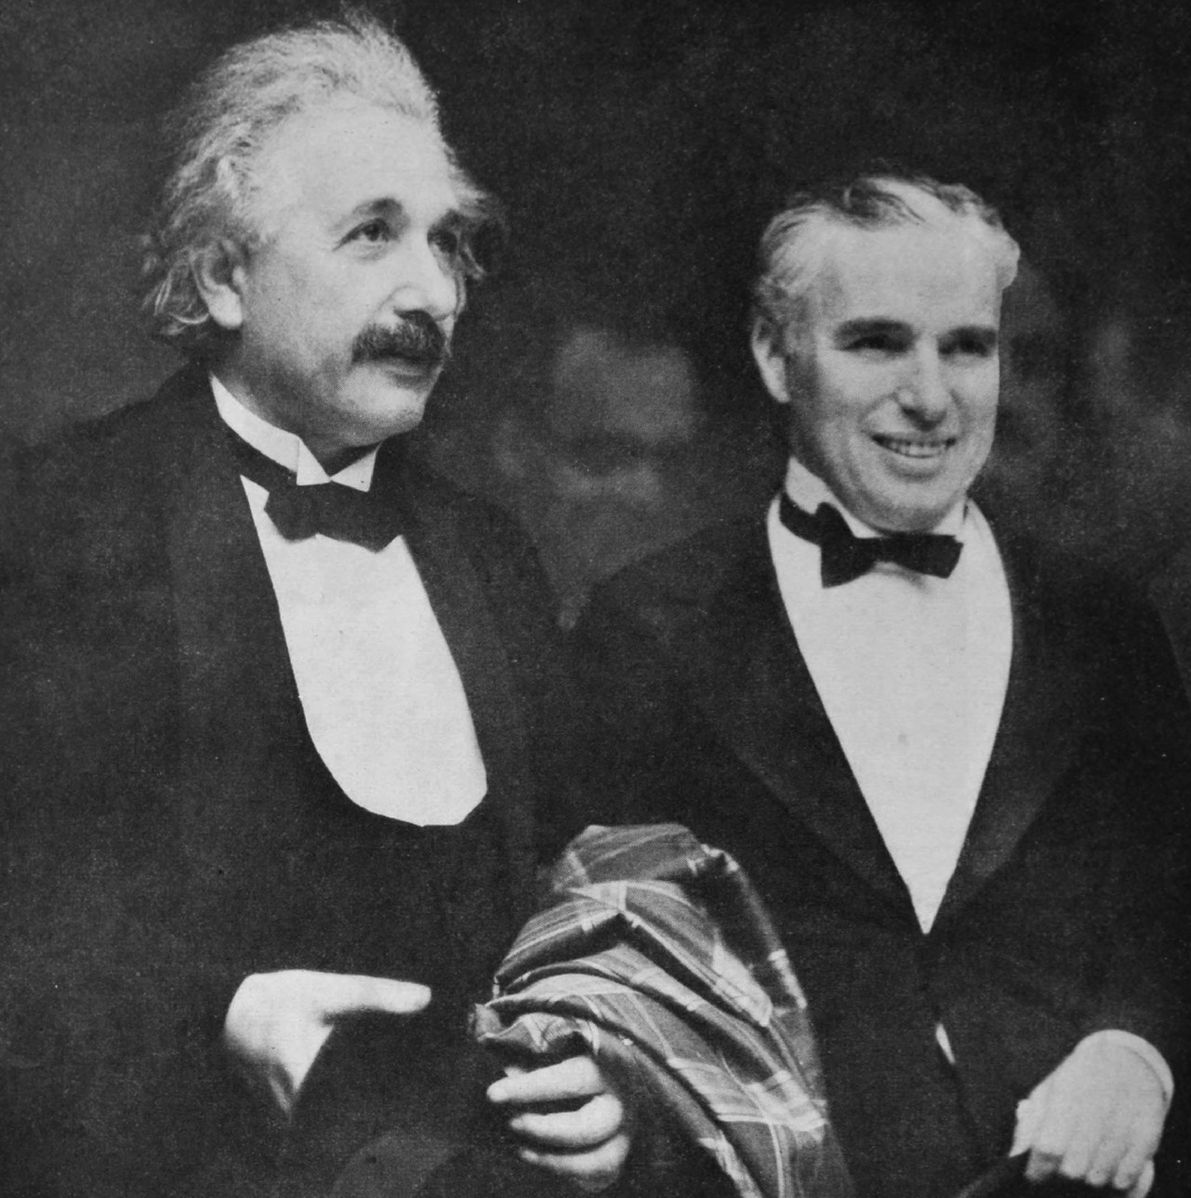 Albert Einstein and Charlie Chaplin, wearing tuxedos and generally being two of the most famous people of the first half of the twentieth century.